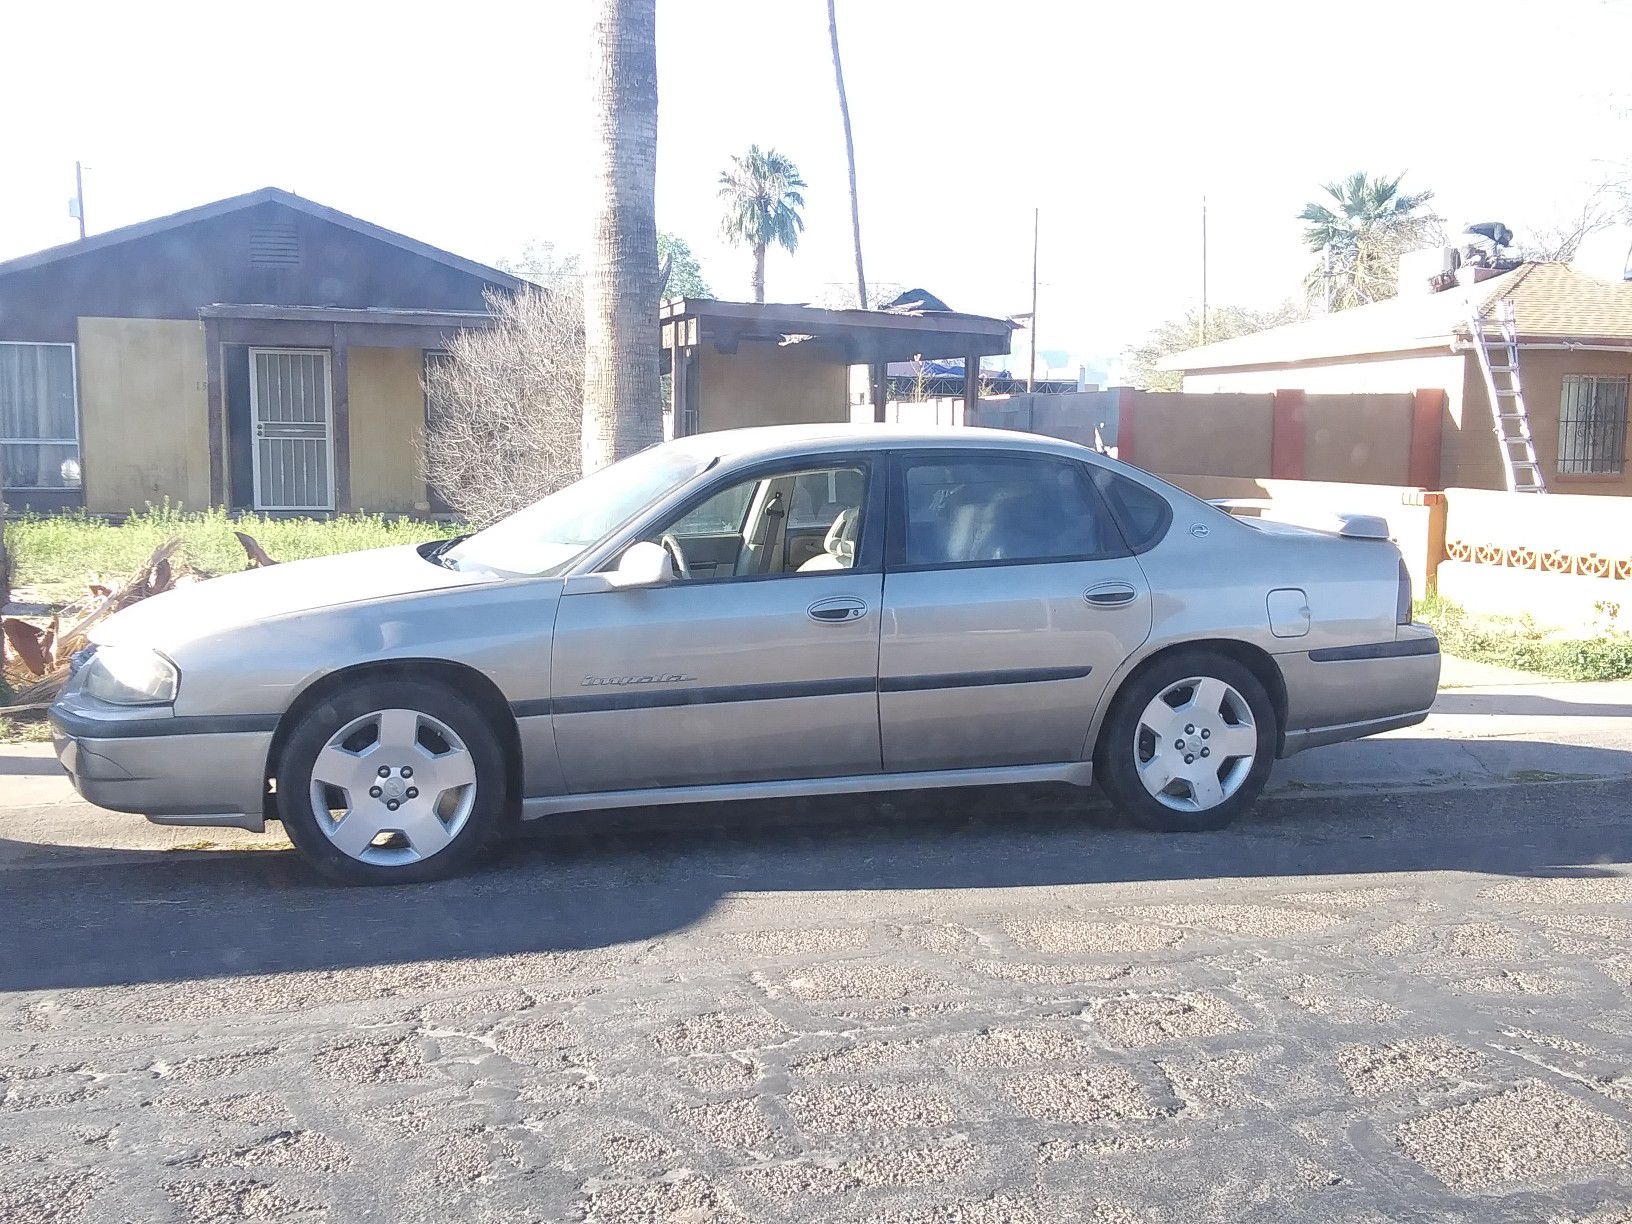 2002 chevy impala for parts